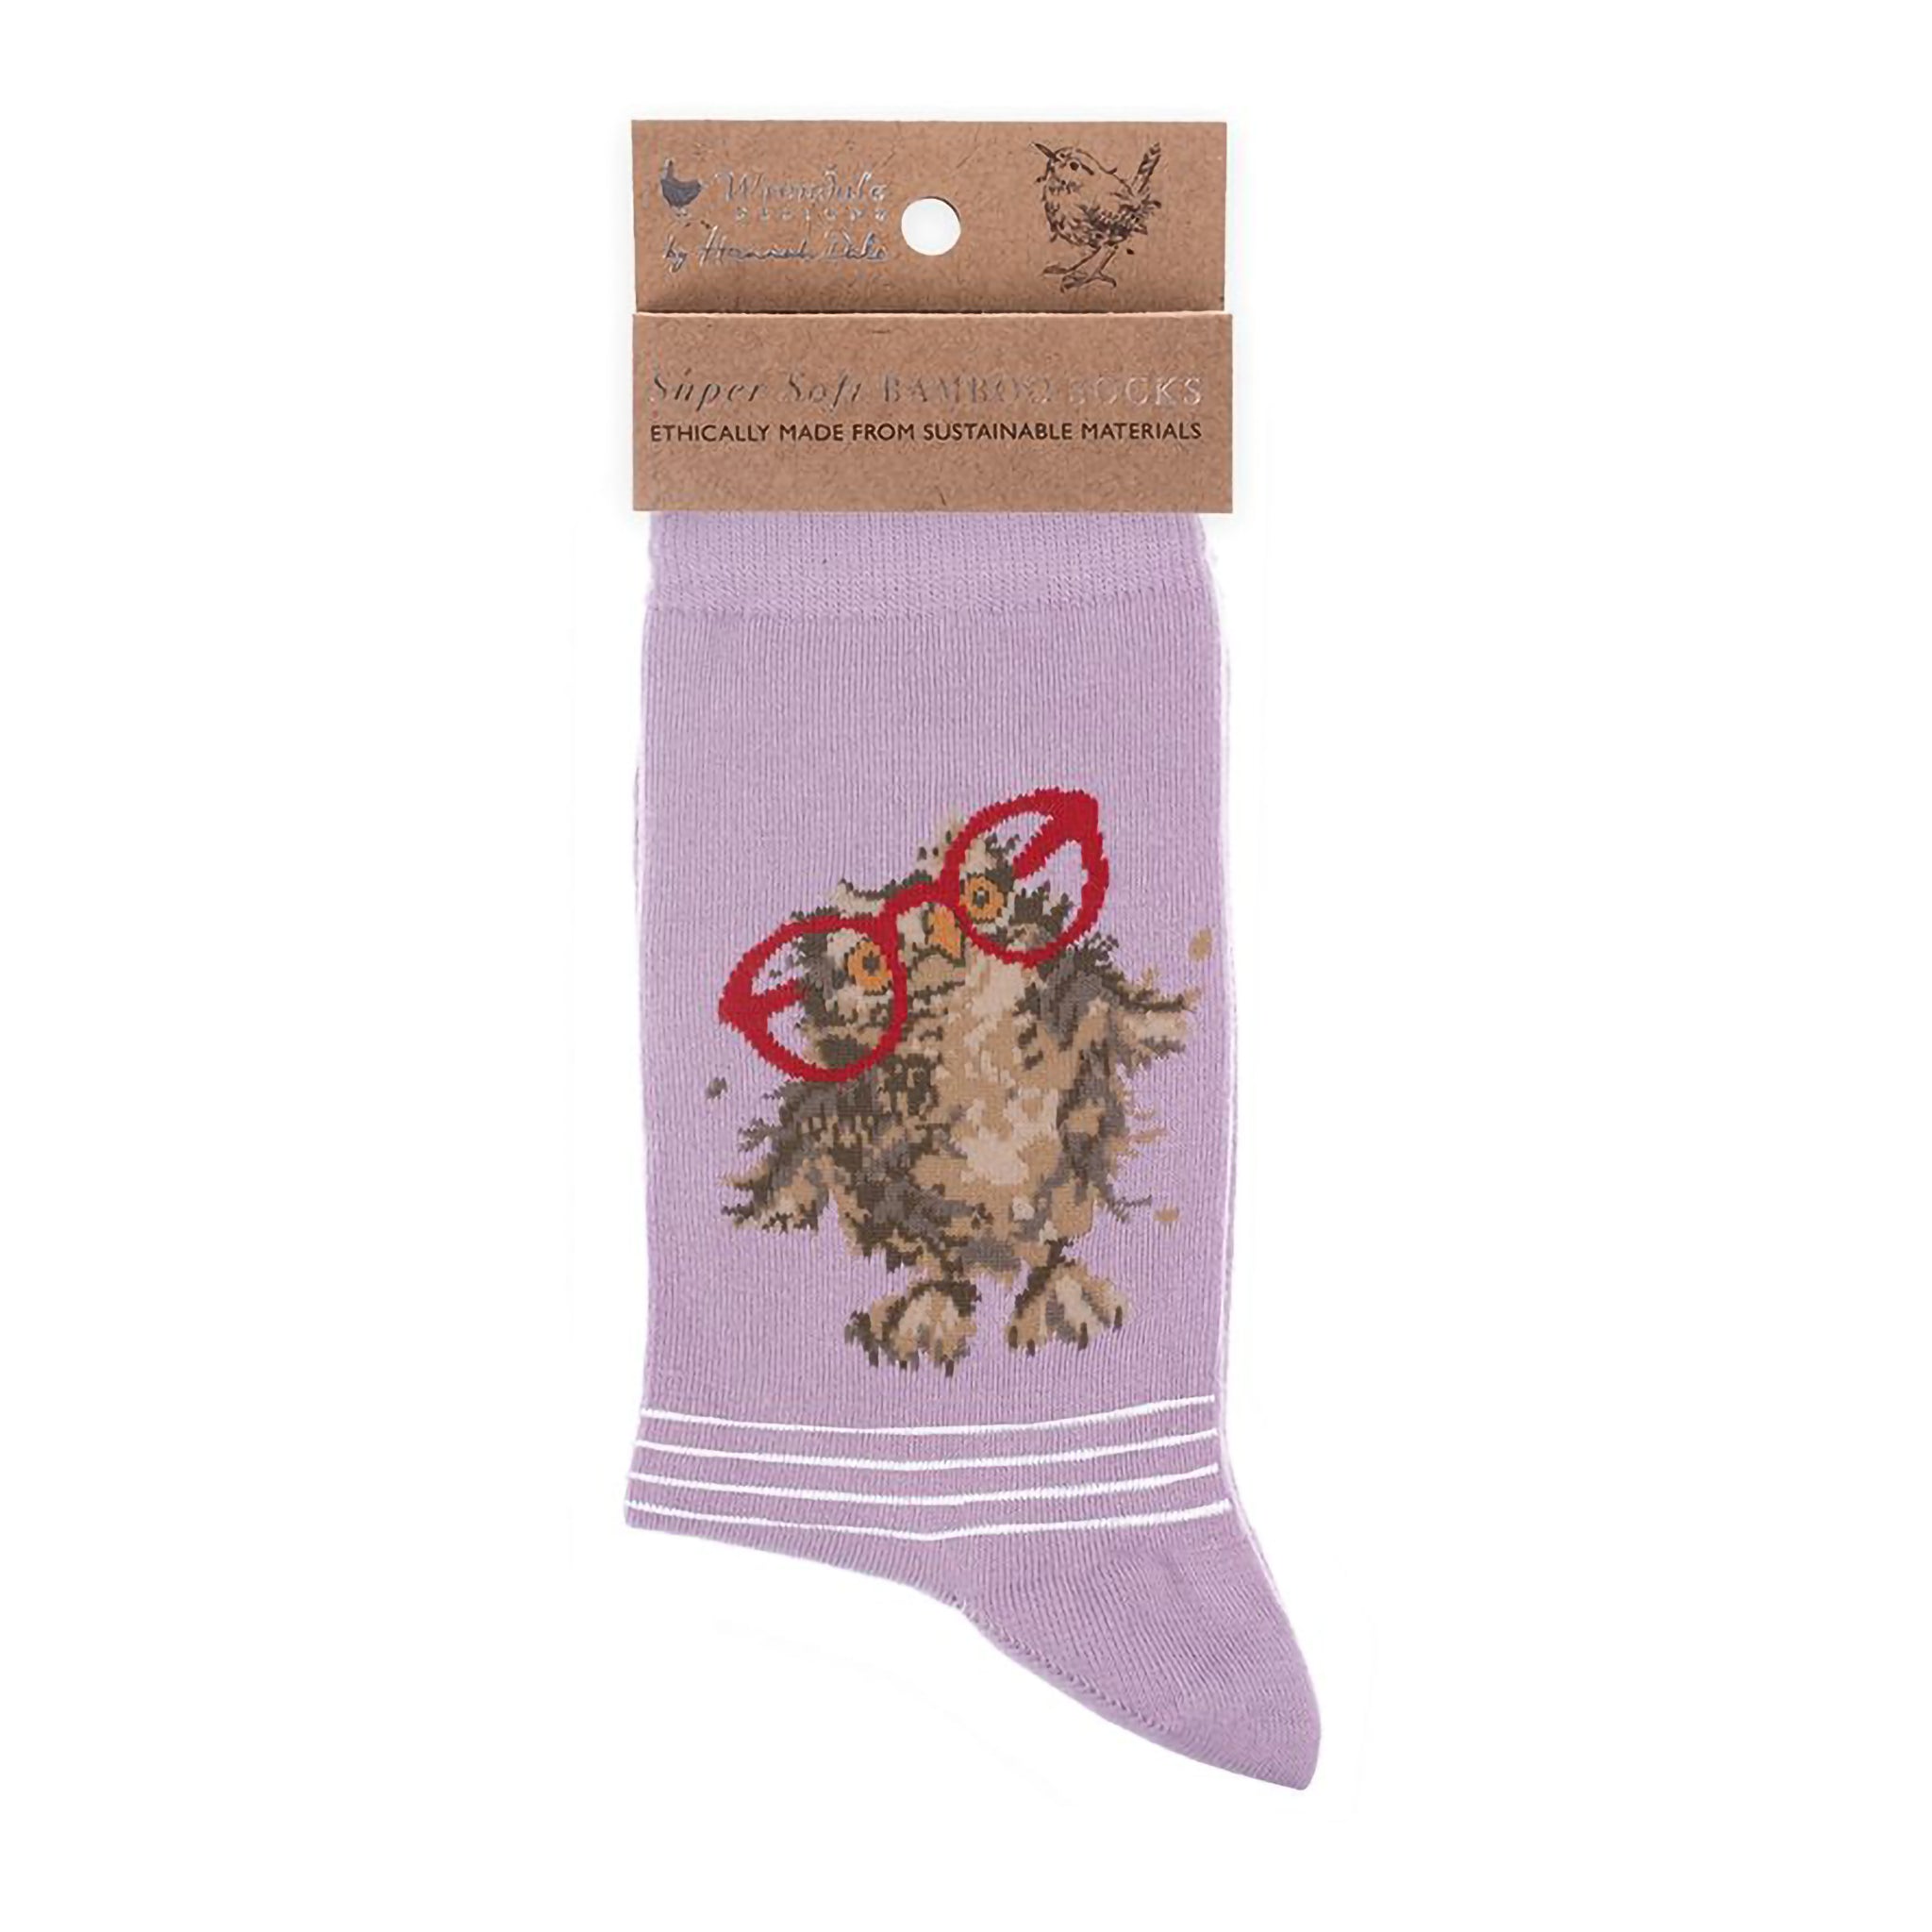 Folded pair of lilac purple socks with a owl with red glasses picture and white stripes